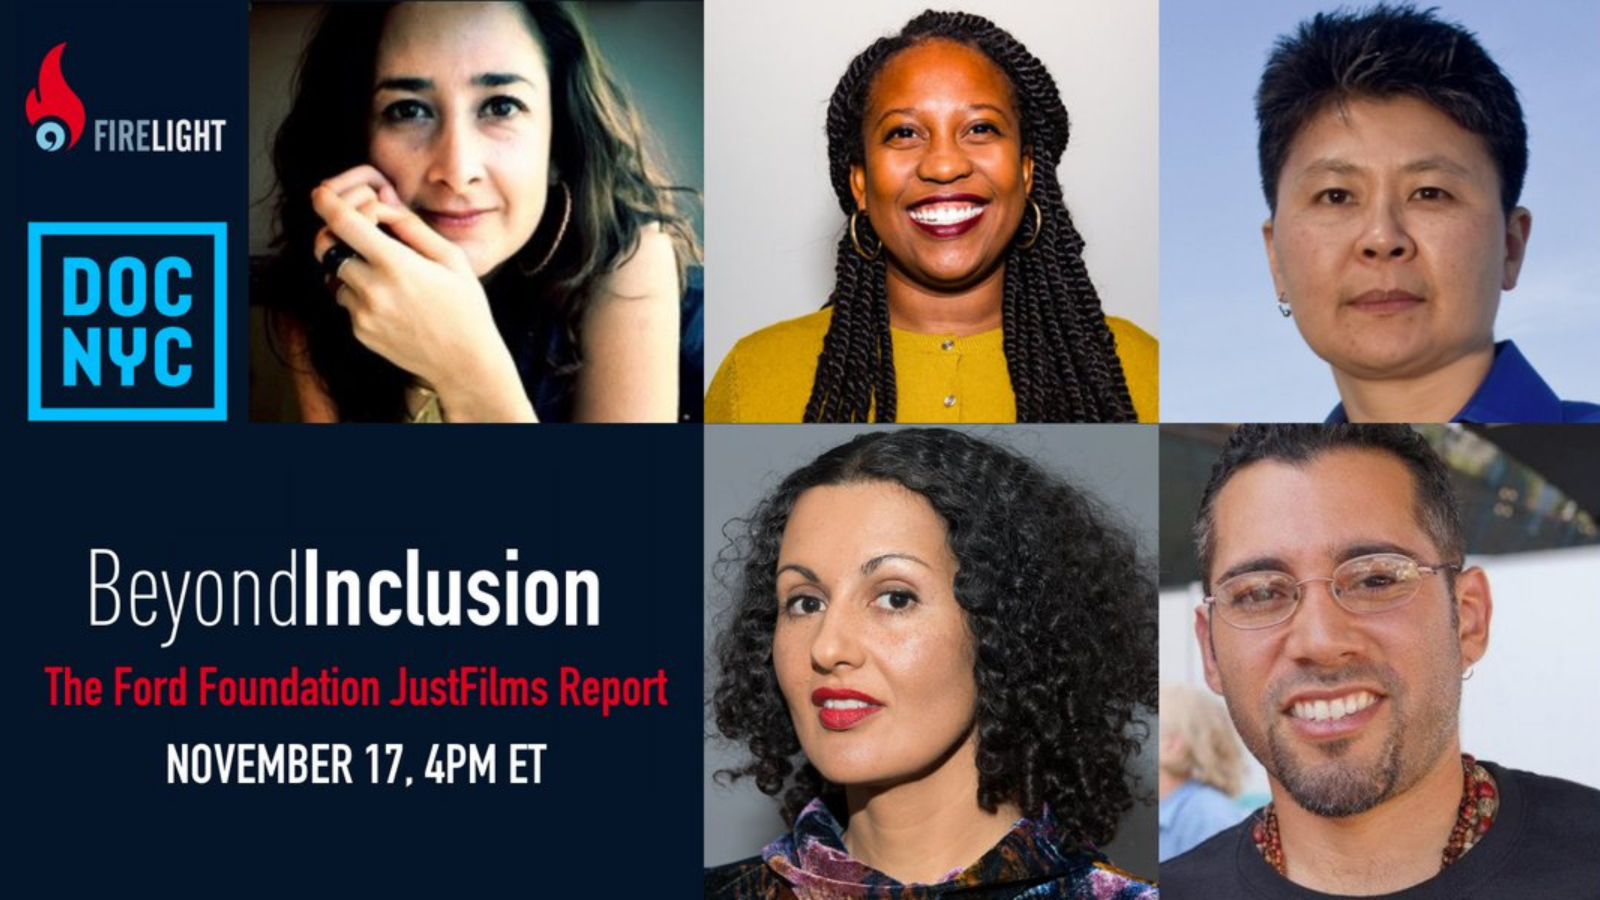 White and red text on a navy background reads Beyond Inclusion: The Ford Foundation JustFilms Report, November 17 at 4pm Eastern Time. The Firelight Media and Doc NYC logos are in the top left corner of the image. The rest of the image is a collage of portrait photos of four women of color and one man of color. In the top left is a woman with light brown skin and dark brown hair and eyes. In the top middle is a Black woman with dark brown skin and long black hair in twists. In the top right is an Asian woman with medium brown skin and dark brown hair. In the bottom left is a woman with medium brown skin and shoulder-length dark curly hair. In the bottom right is a man with medium brown skin, short dark hair, and glasses.